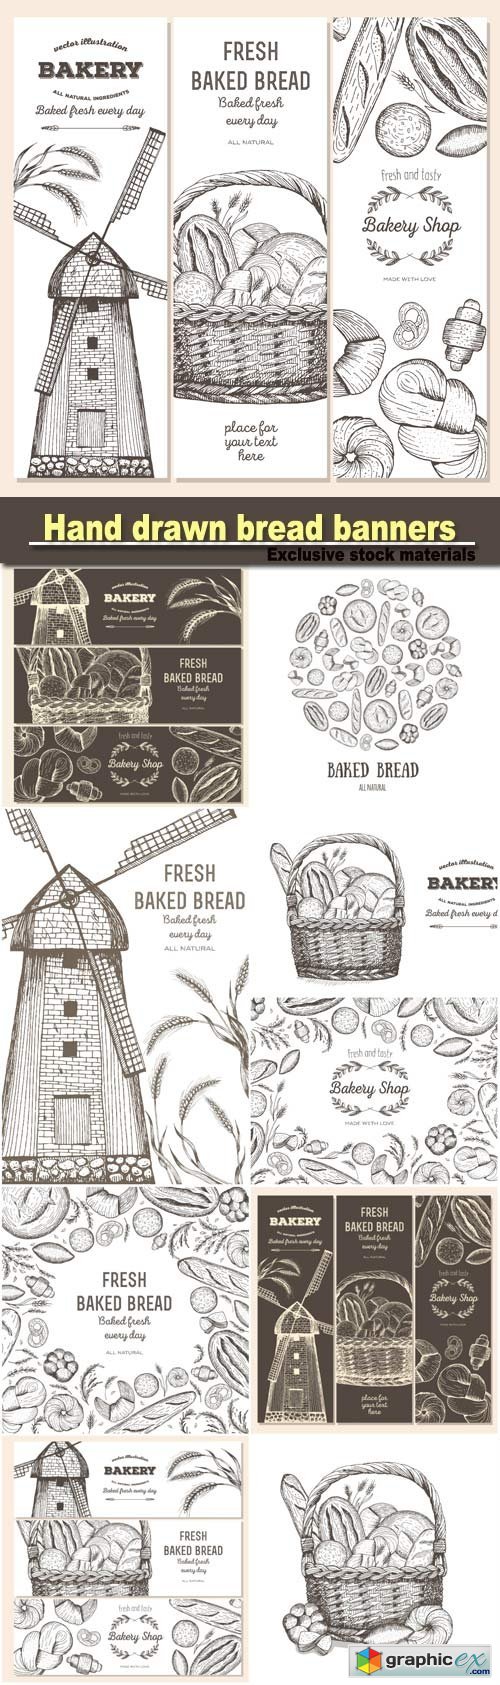 Hand drawn bread horizontal banners, vector illustration in sketch style